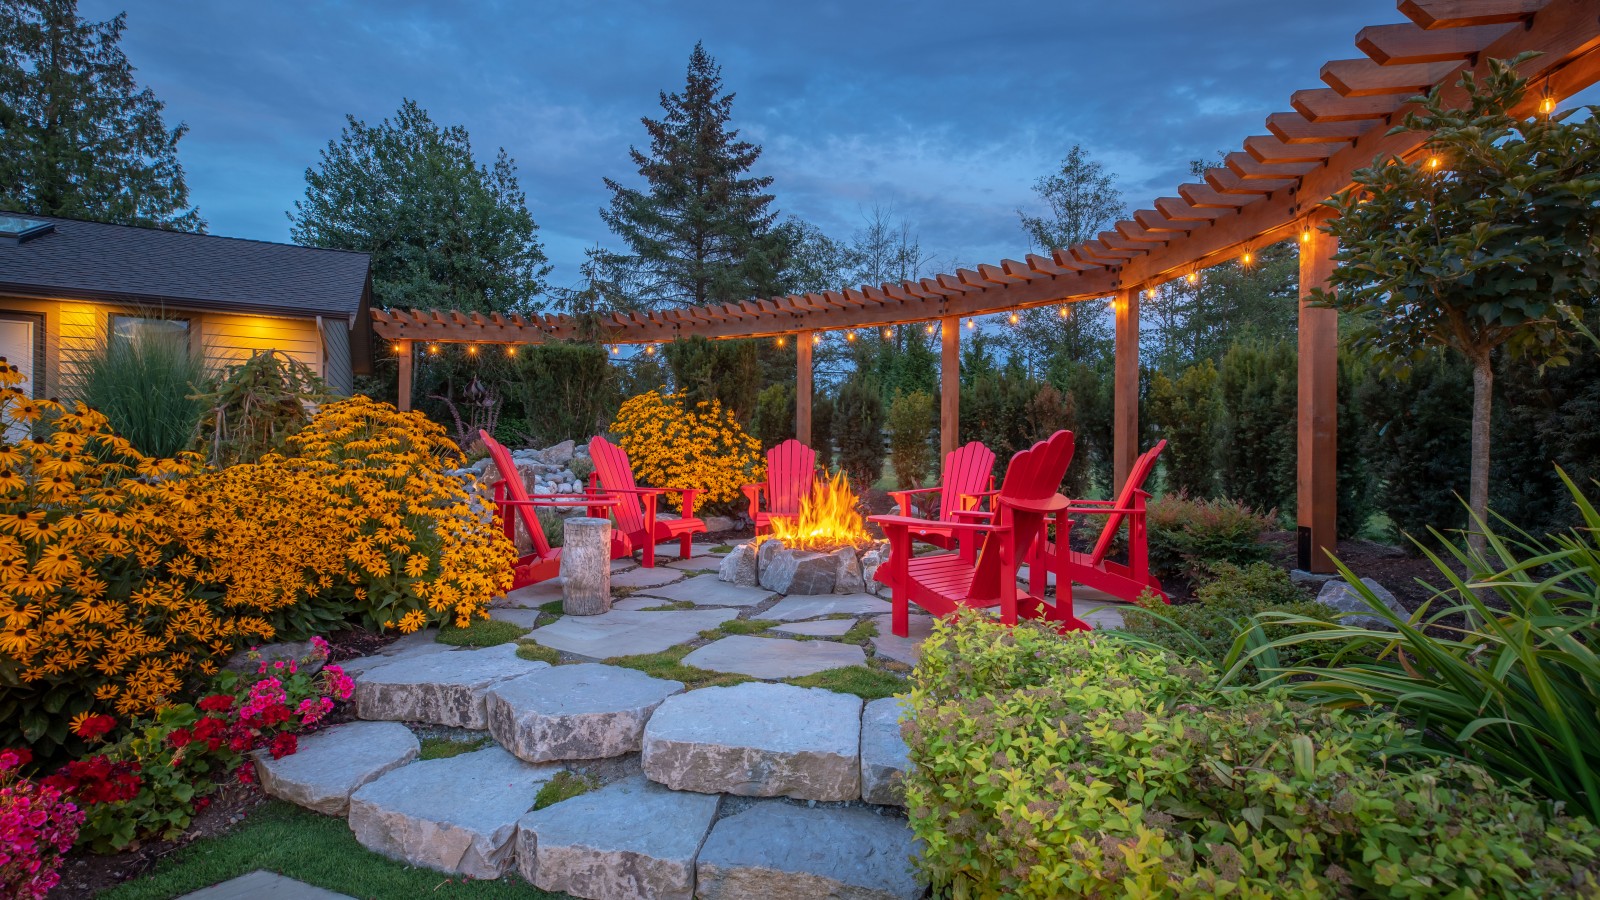 Capture the Beauty of the Night With Landscape Lighting